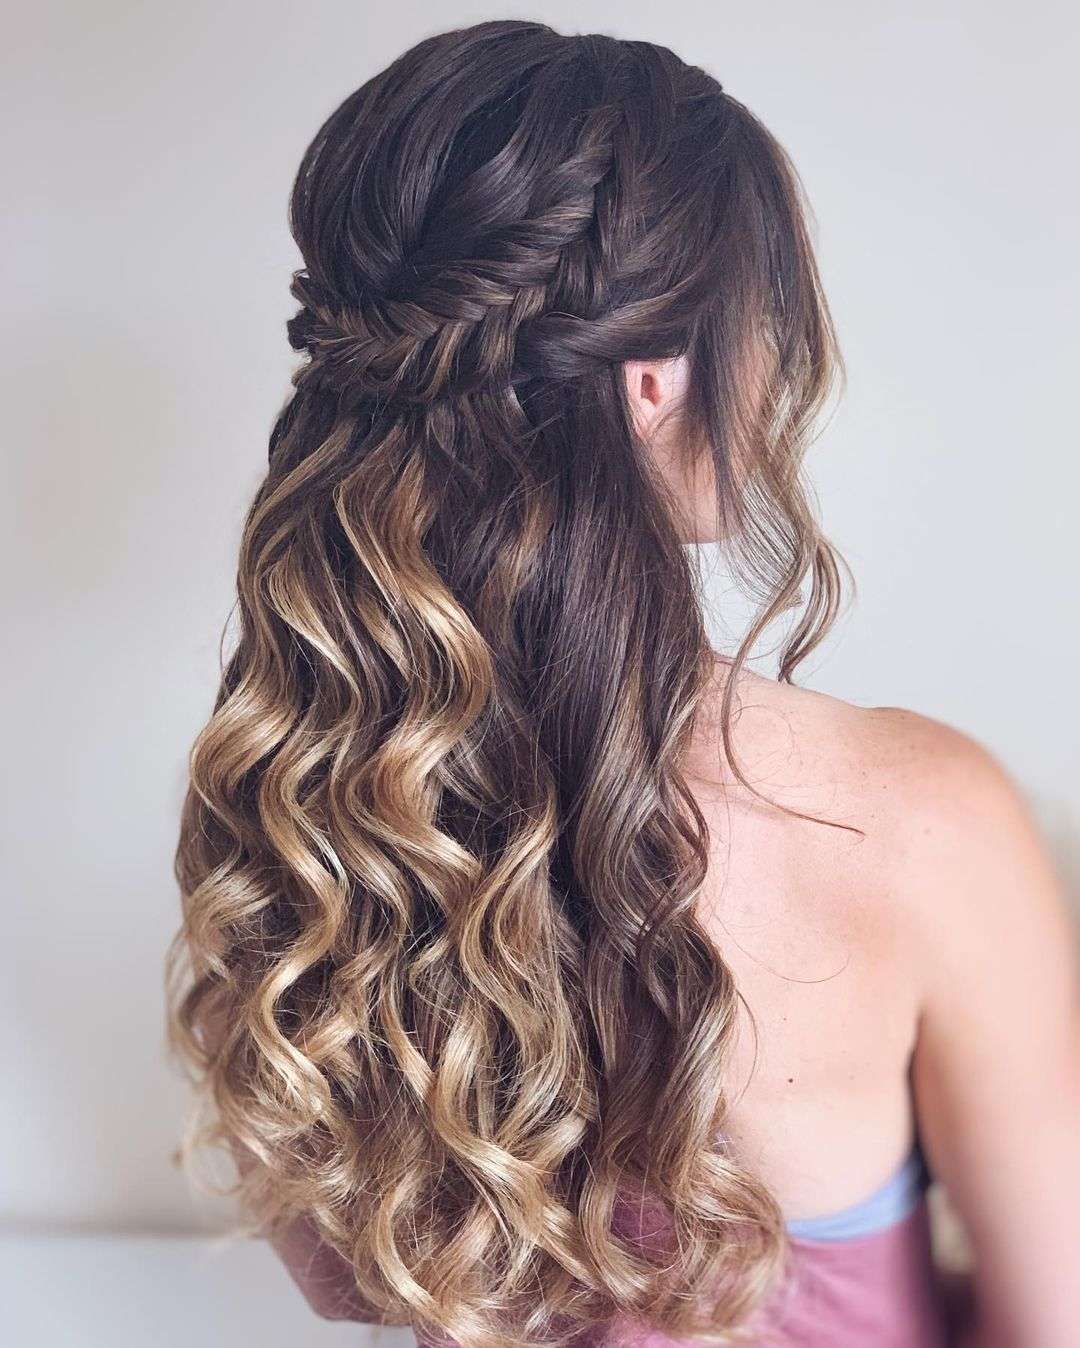 Cute Updos Perfect for Prom Night - Cute Girls Hairstyles